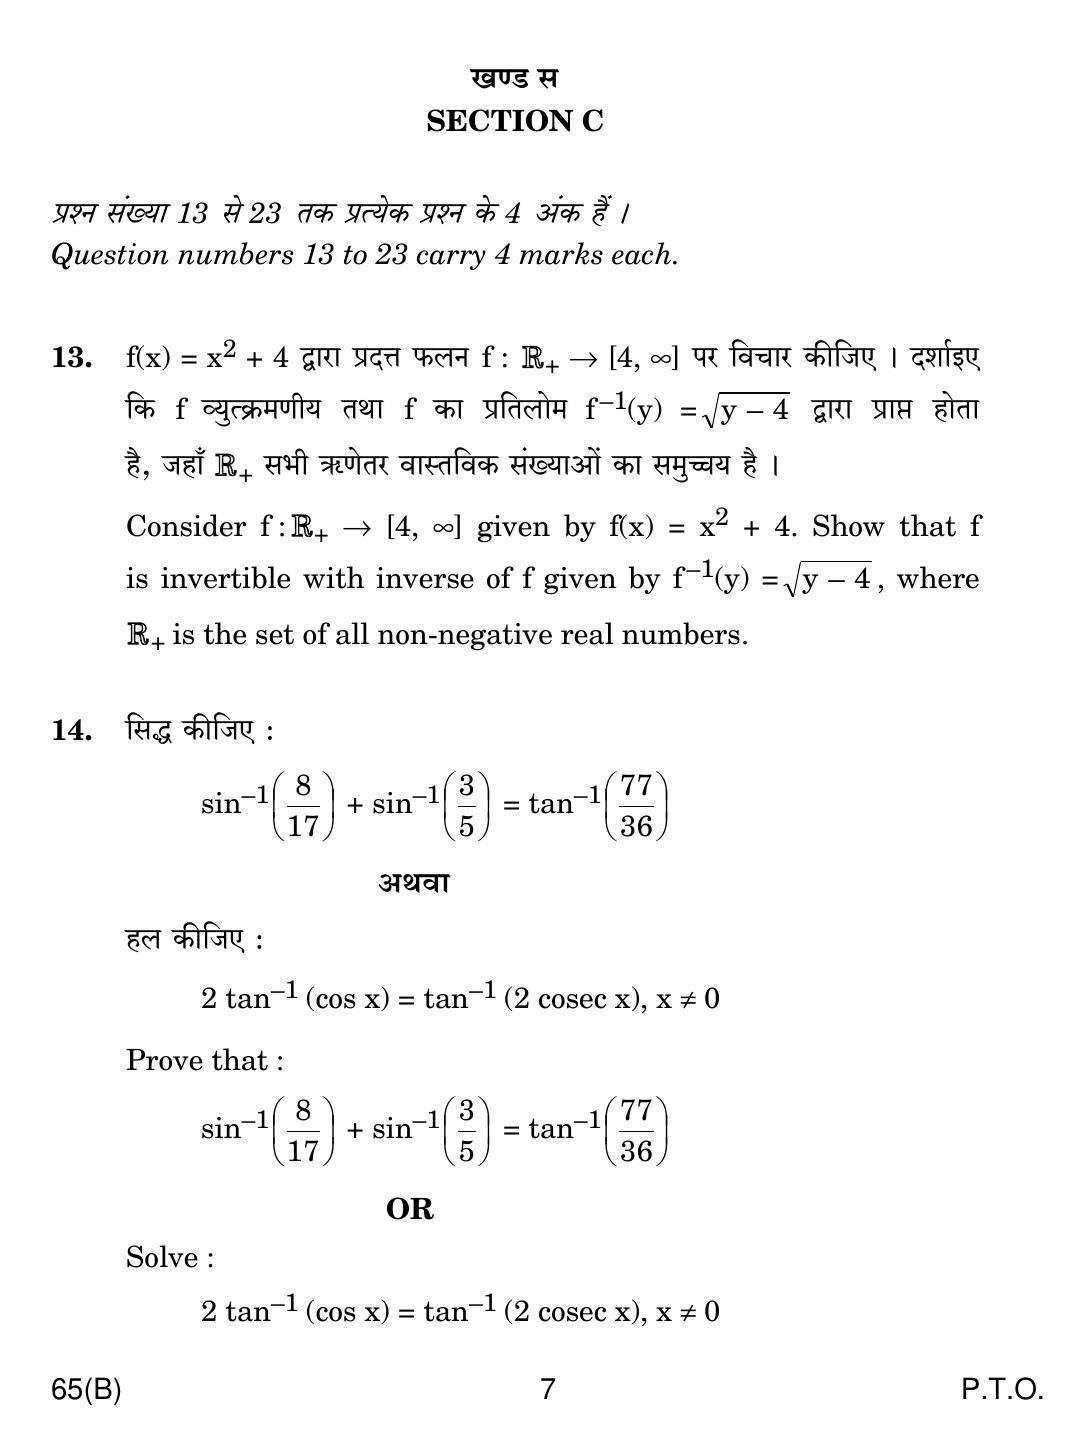 CBSE Class 12 65(B) MATHS For Blind Candidates 2019 Compartment Question Paper - Page 7